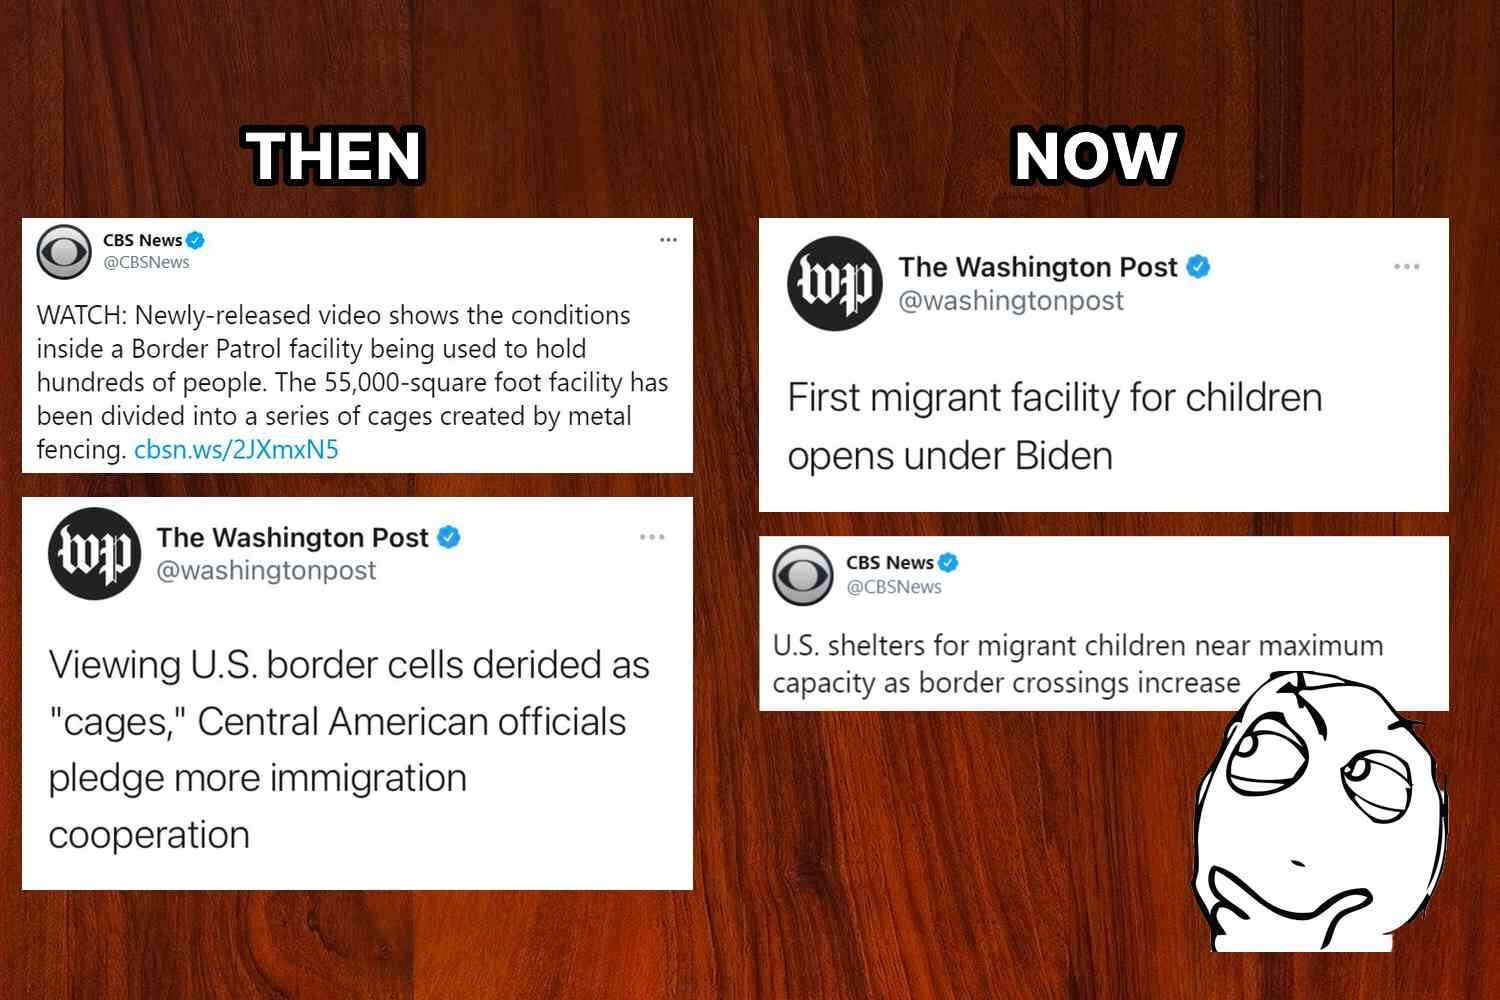 kids in cages then vs now